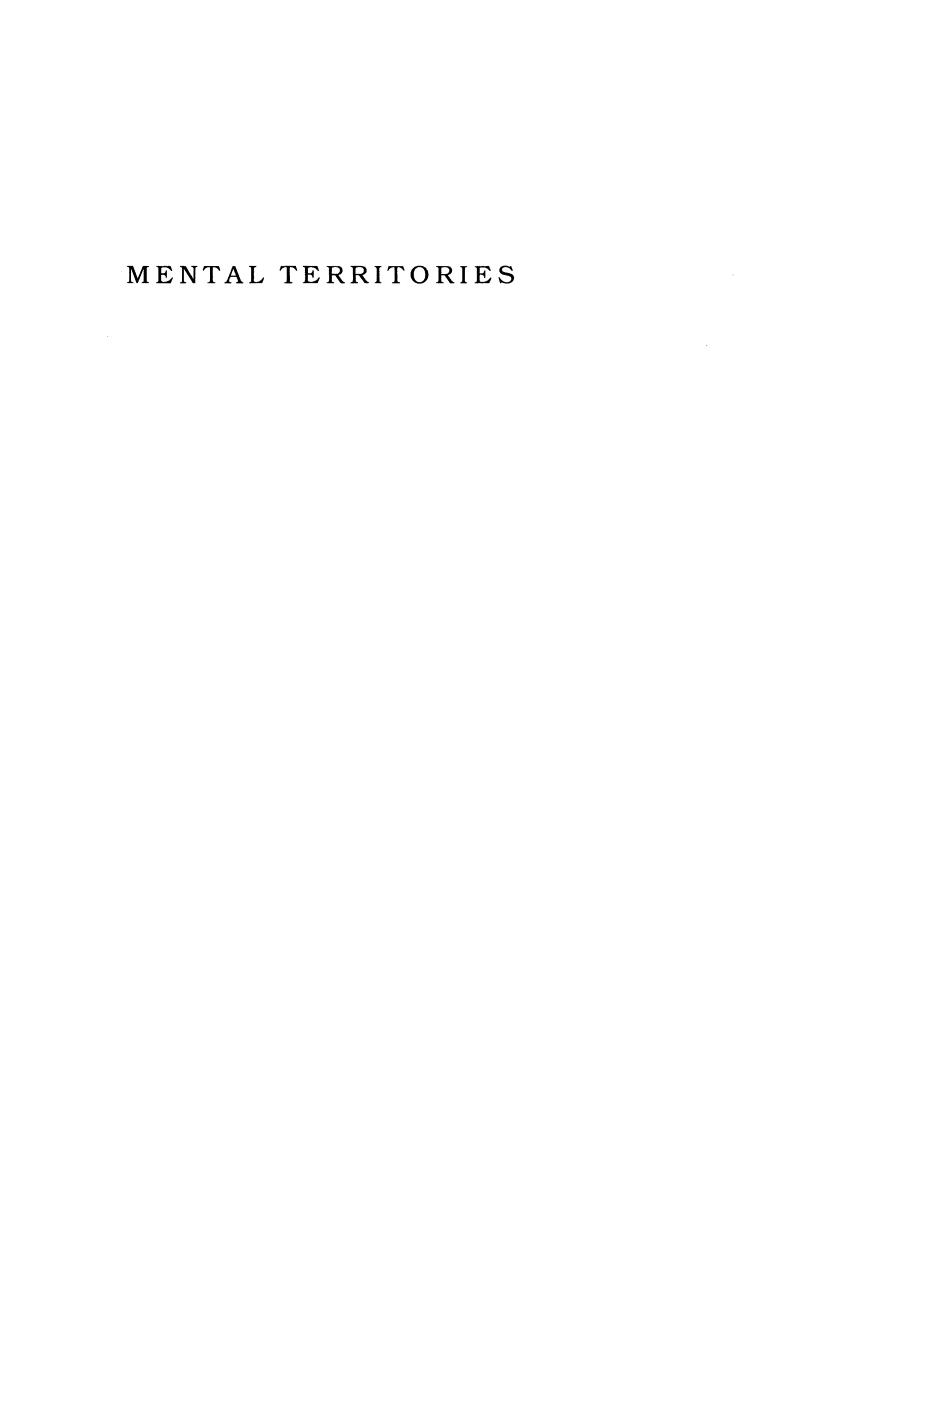 Mental Territories: Mapping the Inland Empire by Katherine G. Morrissey